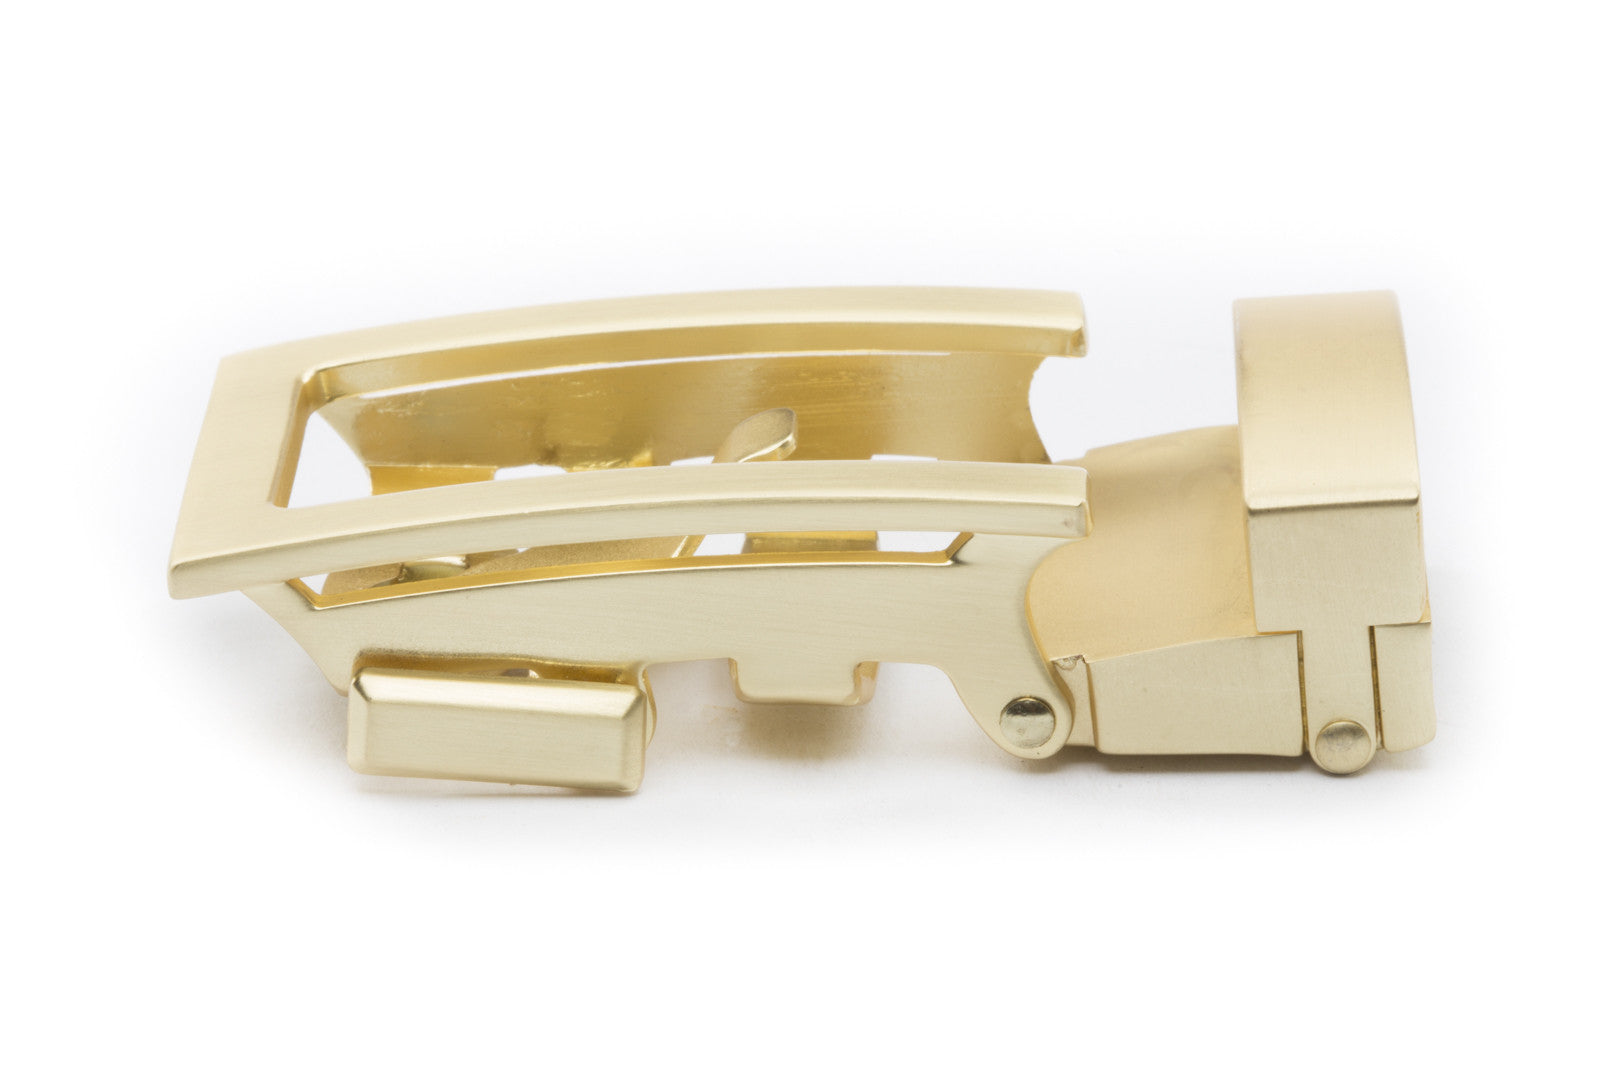 Men's traditional ratchet belt buckle in matte gold with a 1.25-inch width, left side view.